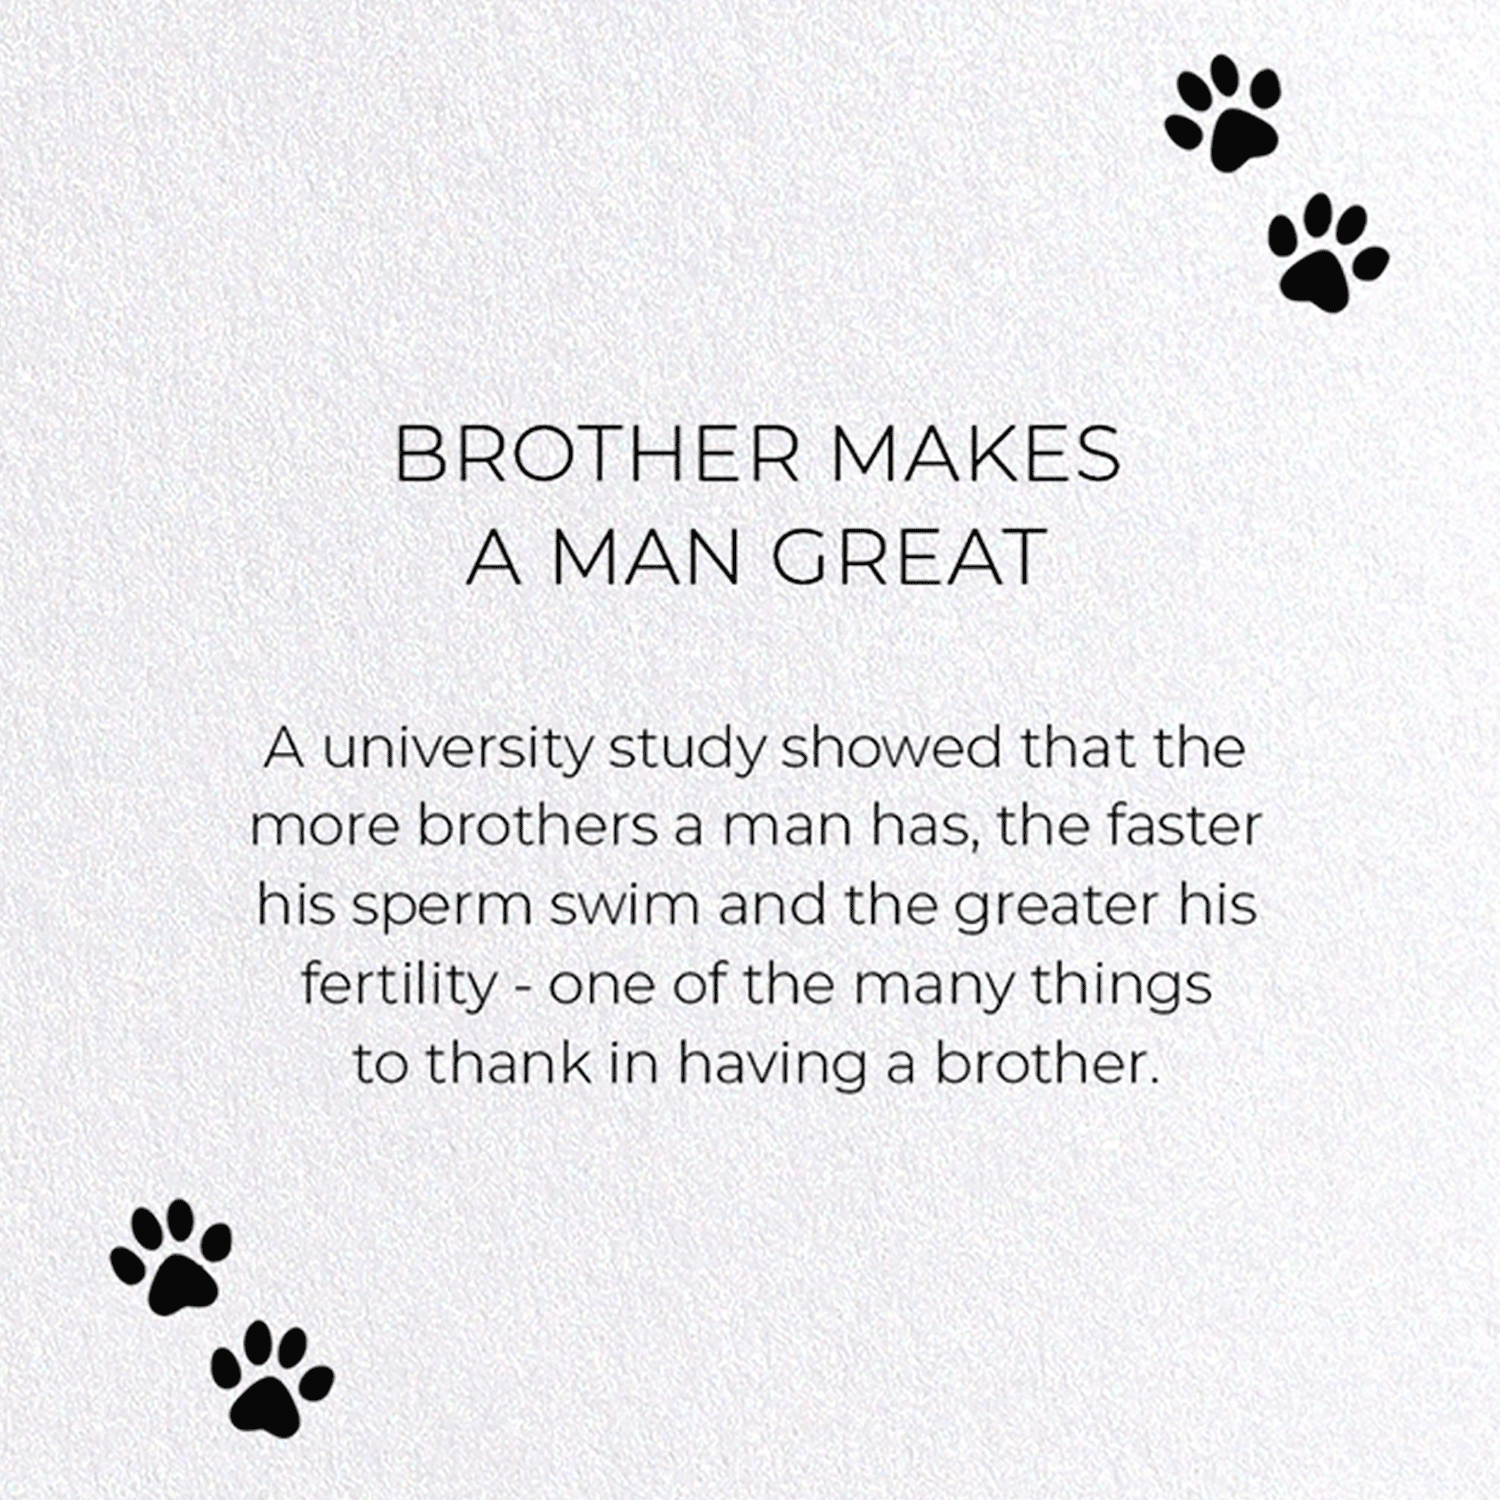 BROTHER MAKES A MAN GREAT: Funny Animal Greeting Card